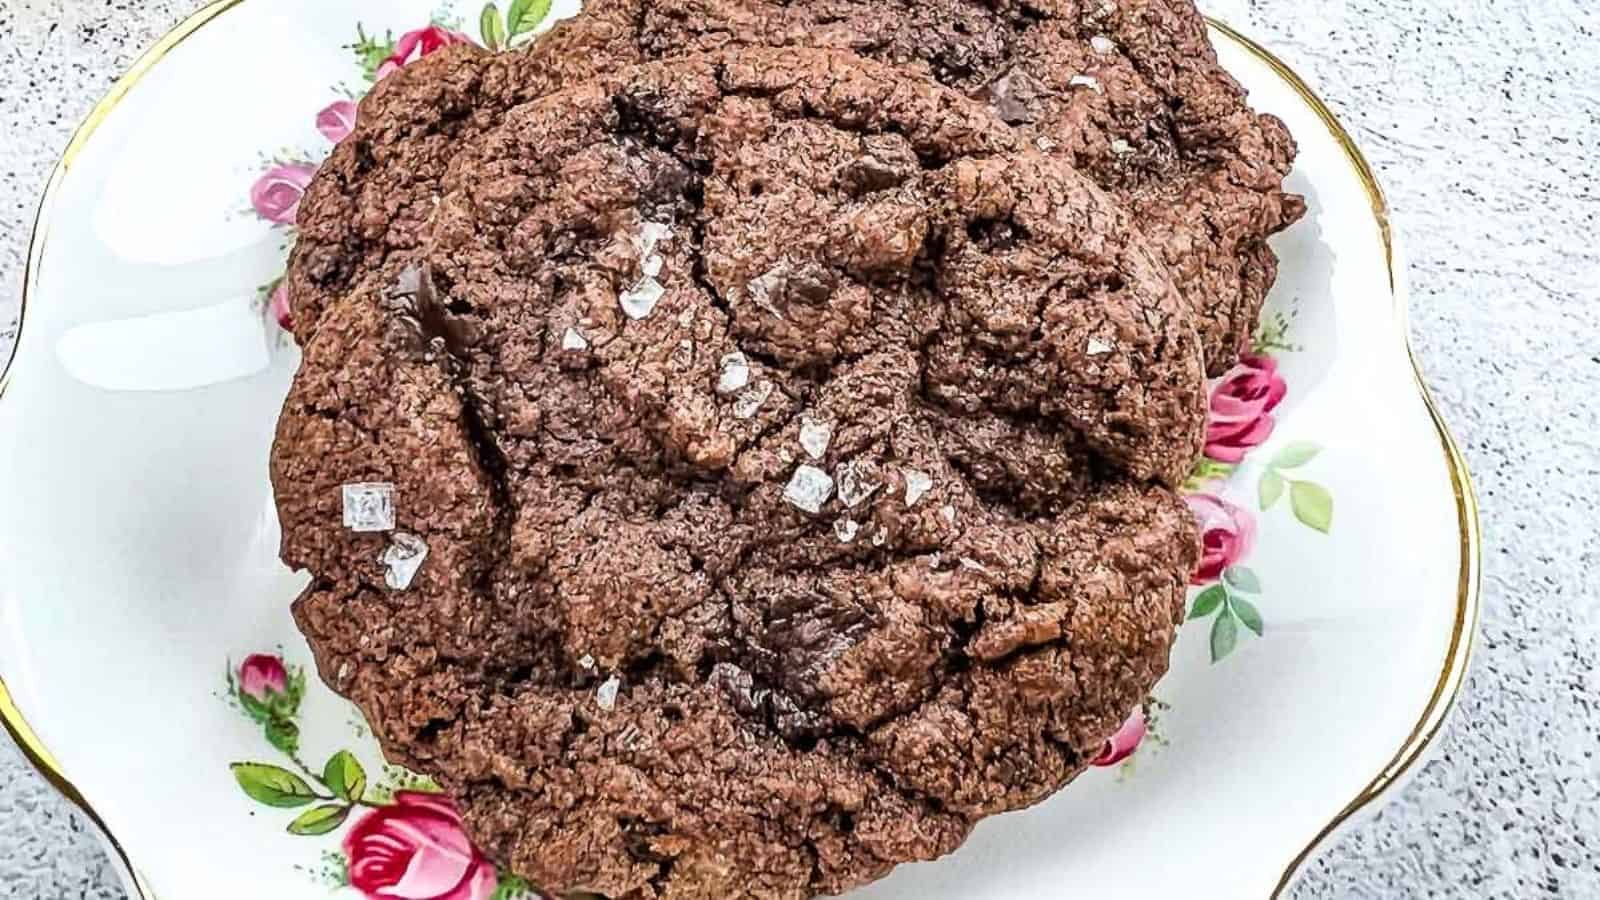 A close-up of a large chocolate cookie sprinkled with coarse salt, placed on a decorative plate with pink rose patterns.